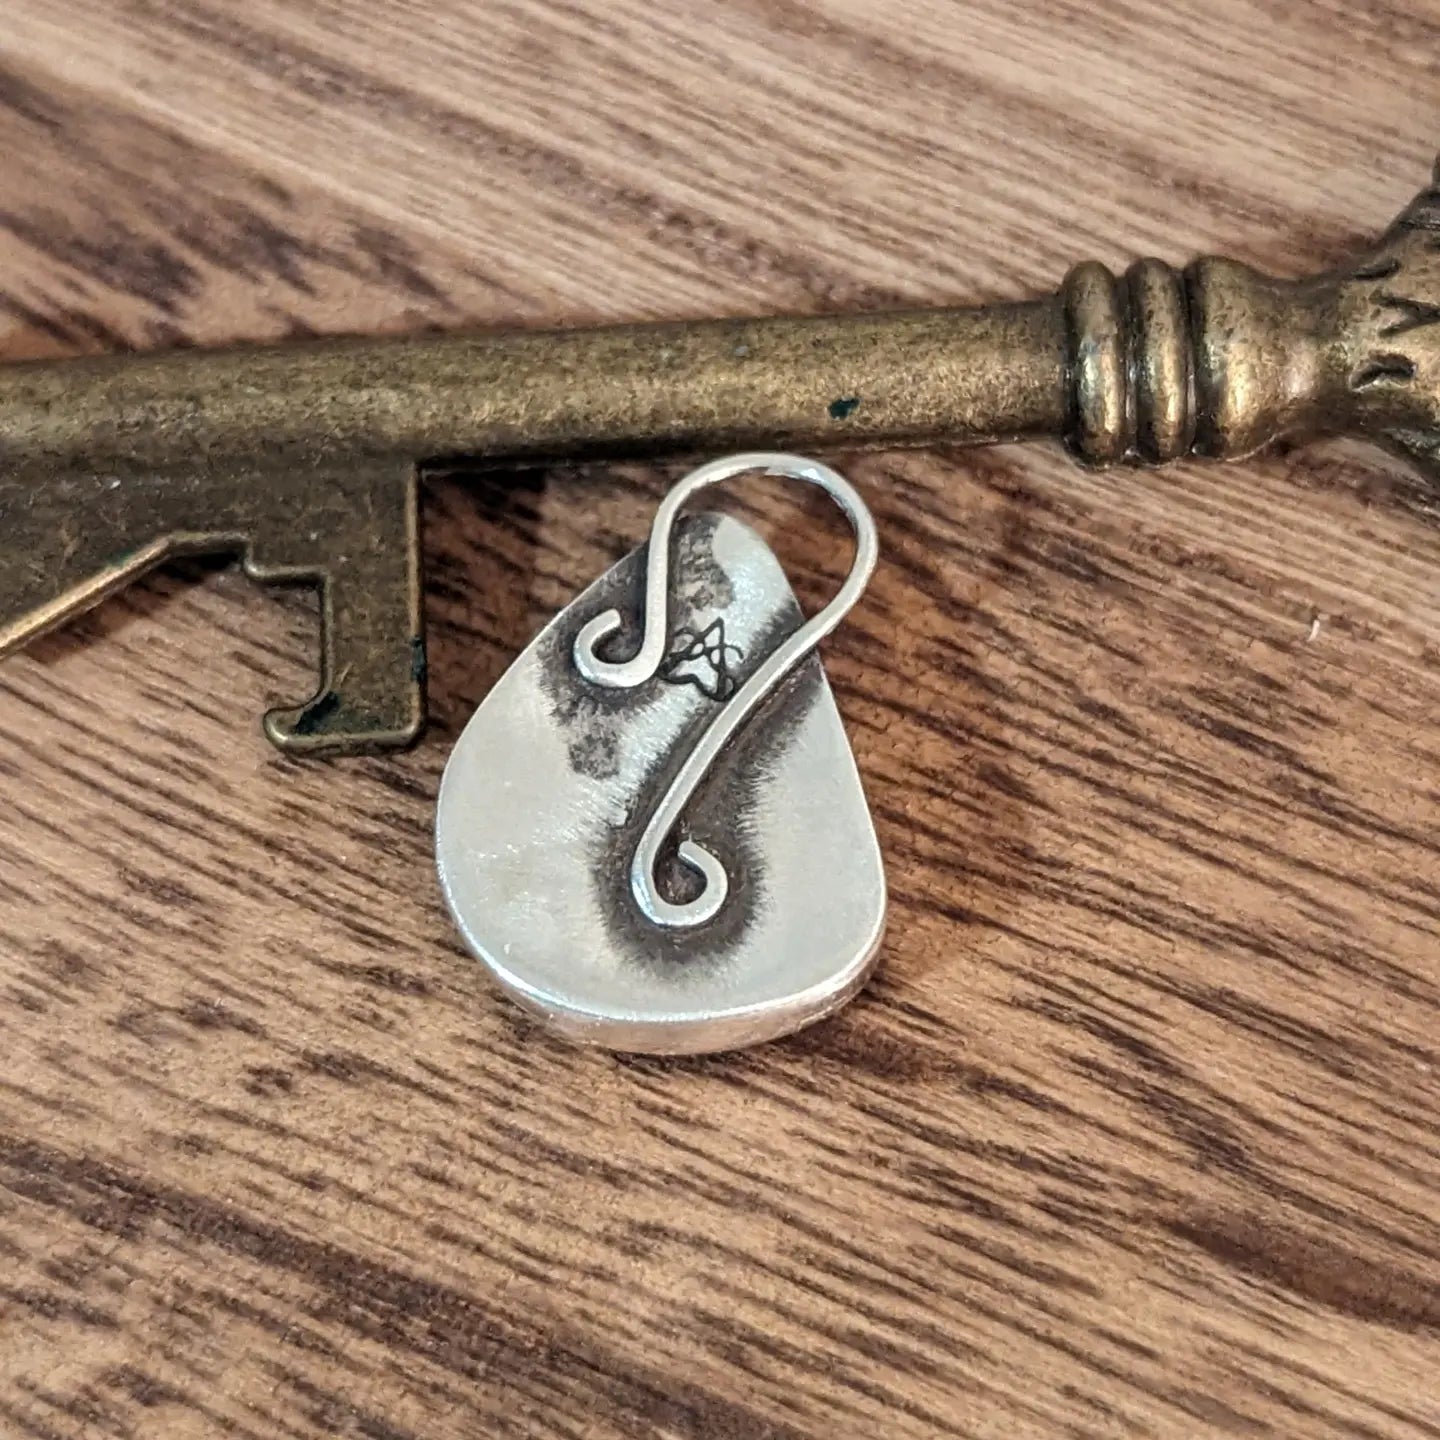 The back of the silver charoite pendant with a slender bail attached to the back in a curling shape and the Aras Sivad logo in a dark patina.